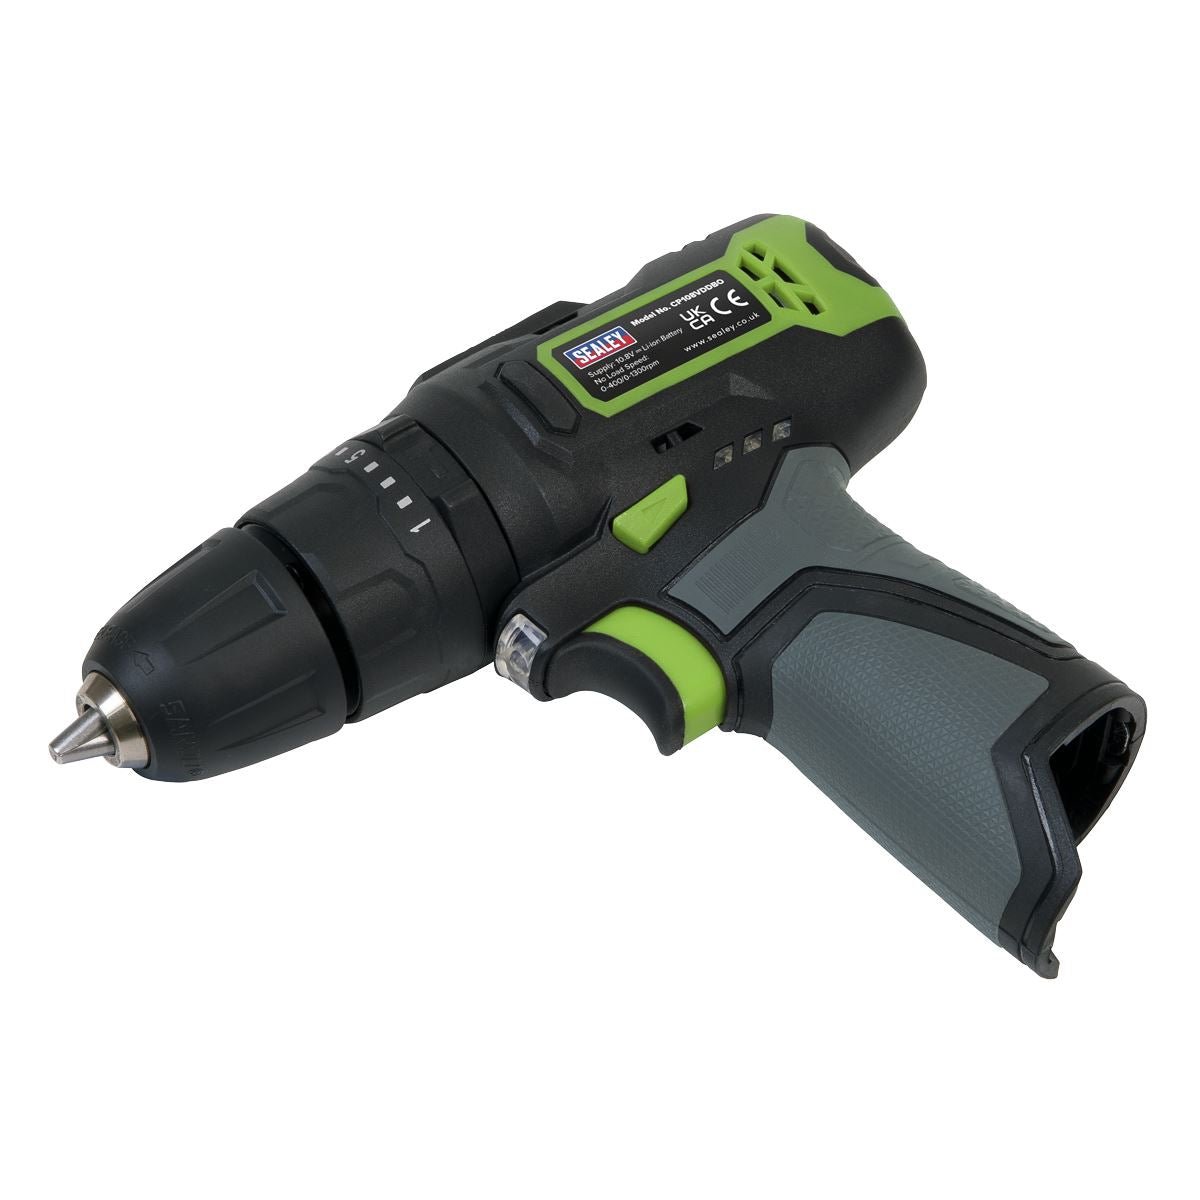 Sealey Cordless Combi Drill Ø10mm 10.8V SV10.8 Series - Body Only